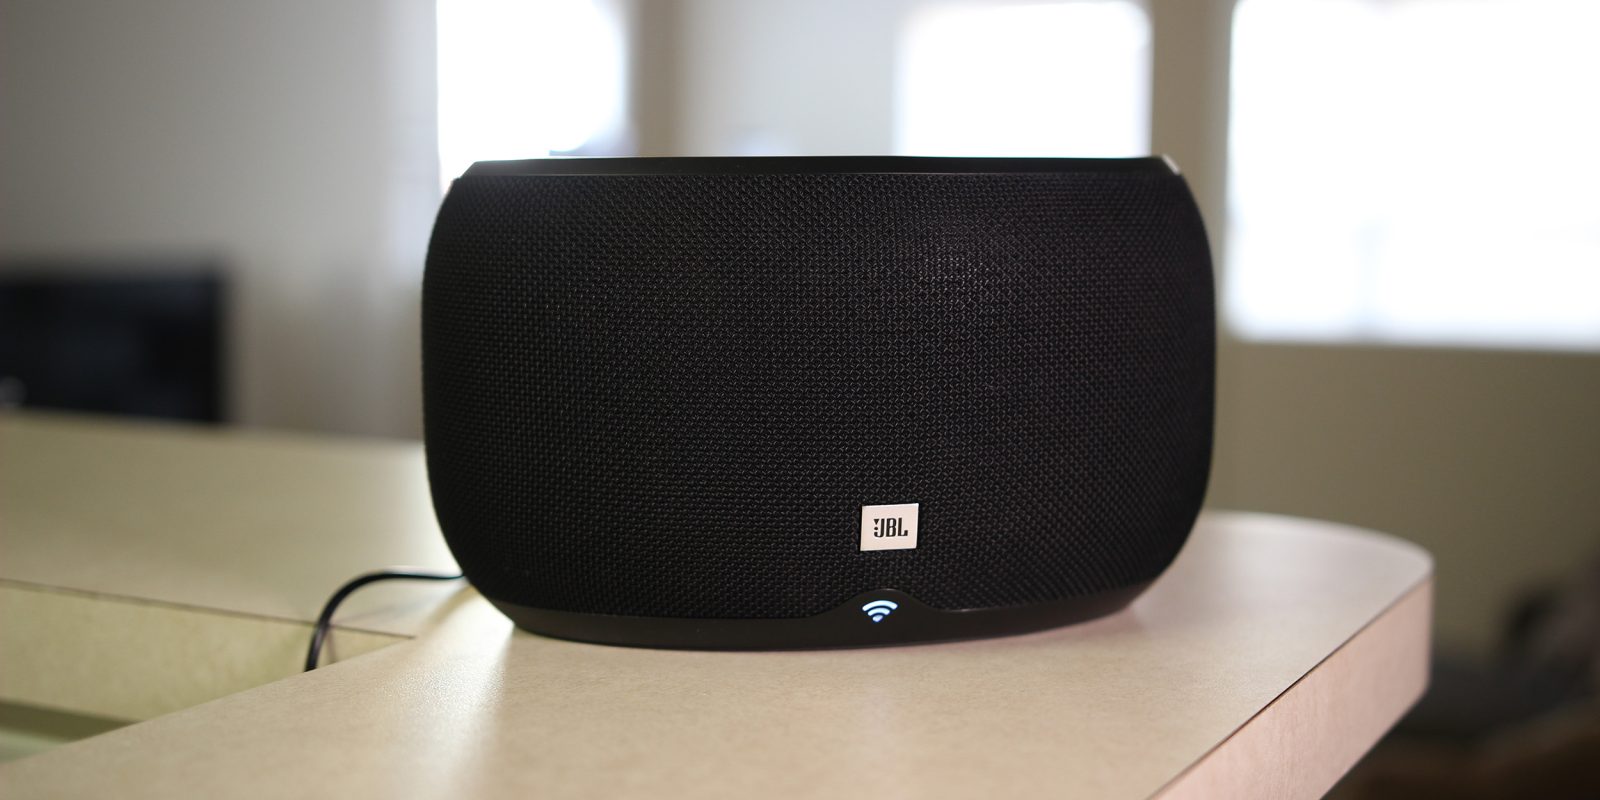 Antage Examen album dyr Review: The JBL Link 300 is the Google Home Max you can actually afford